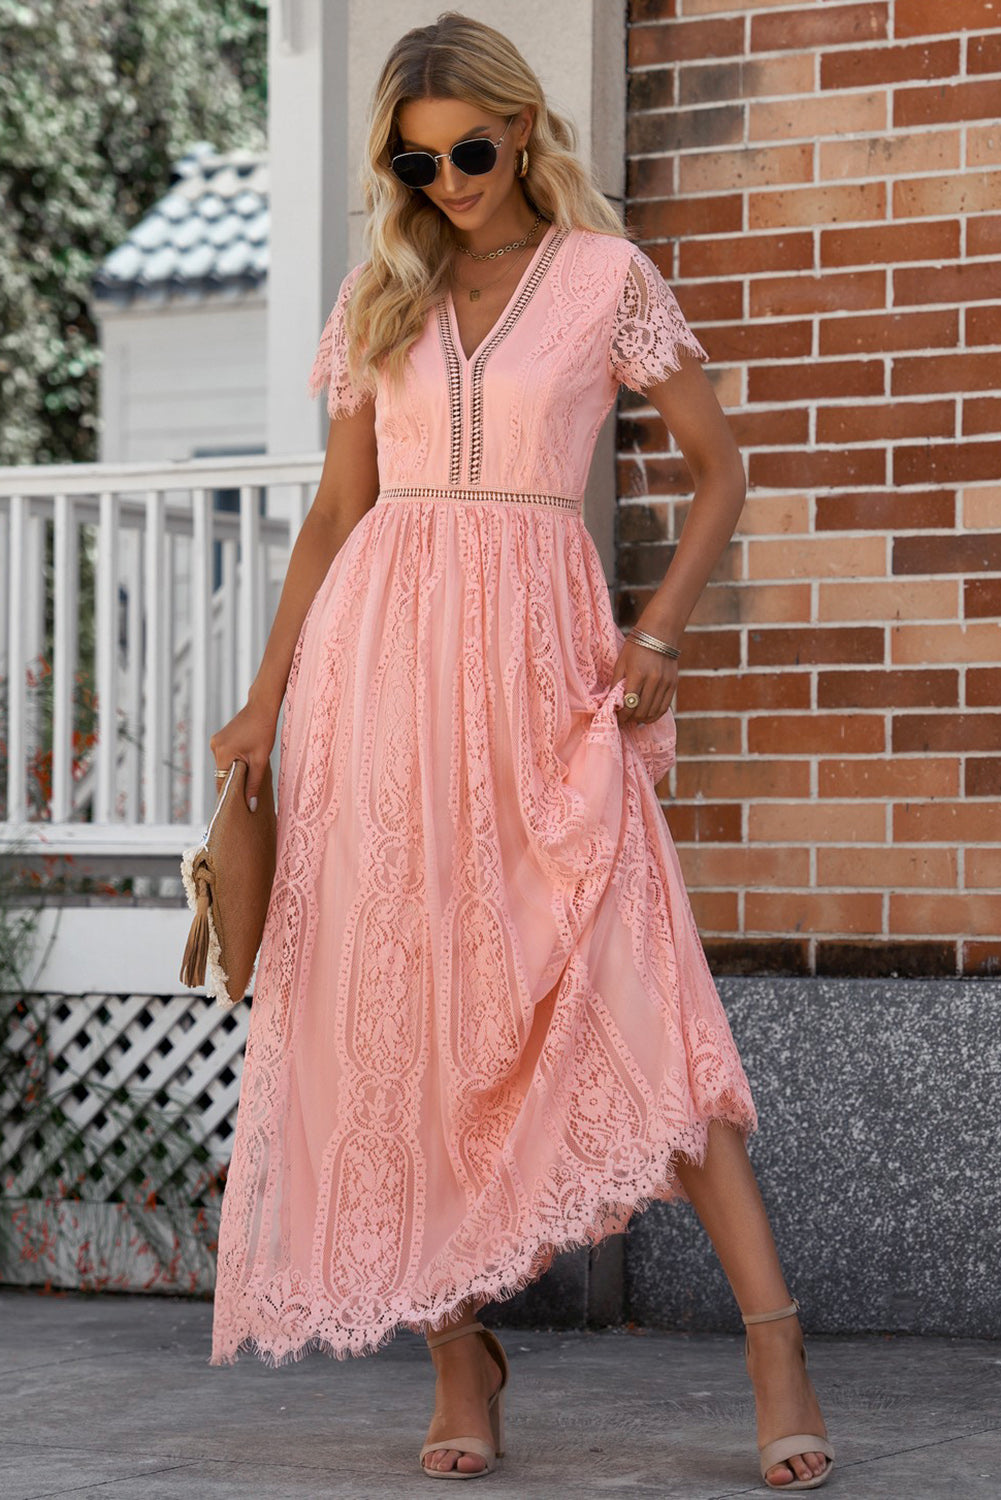 Scalloped Trim Lace Plunge Dress-SHIPS DIRECTLY TO YOU!